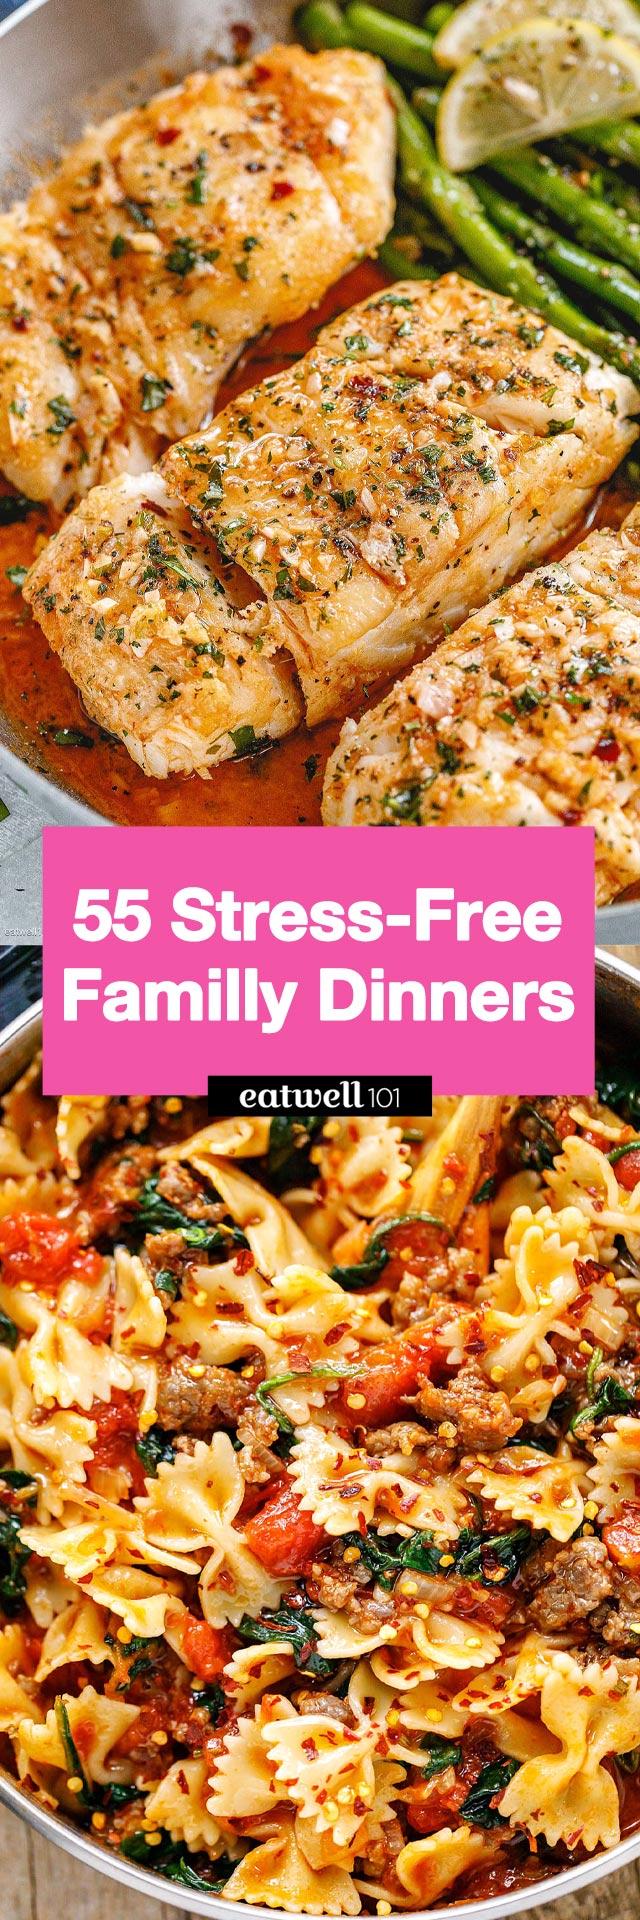 Family Dinner Recipes - #dinner #weeknight #eatwell101 #recipes - Make weeknight dinners a breeze with these cheap and easy dinner recipes! 